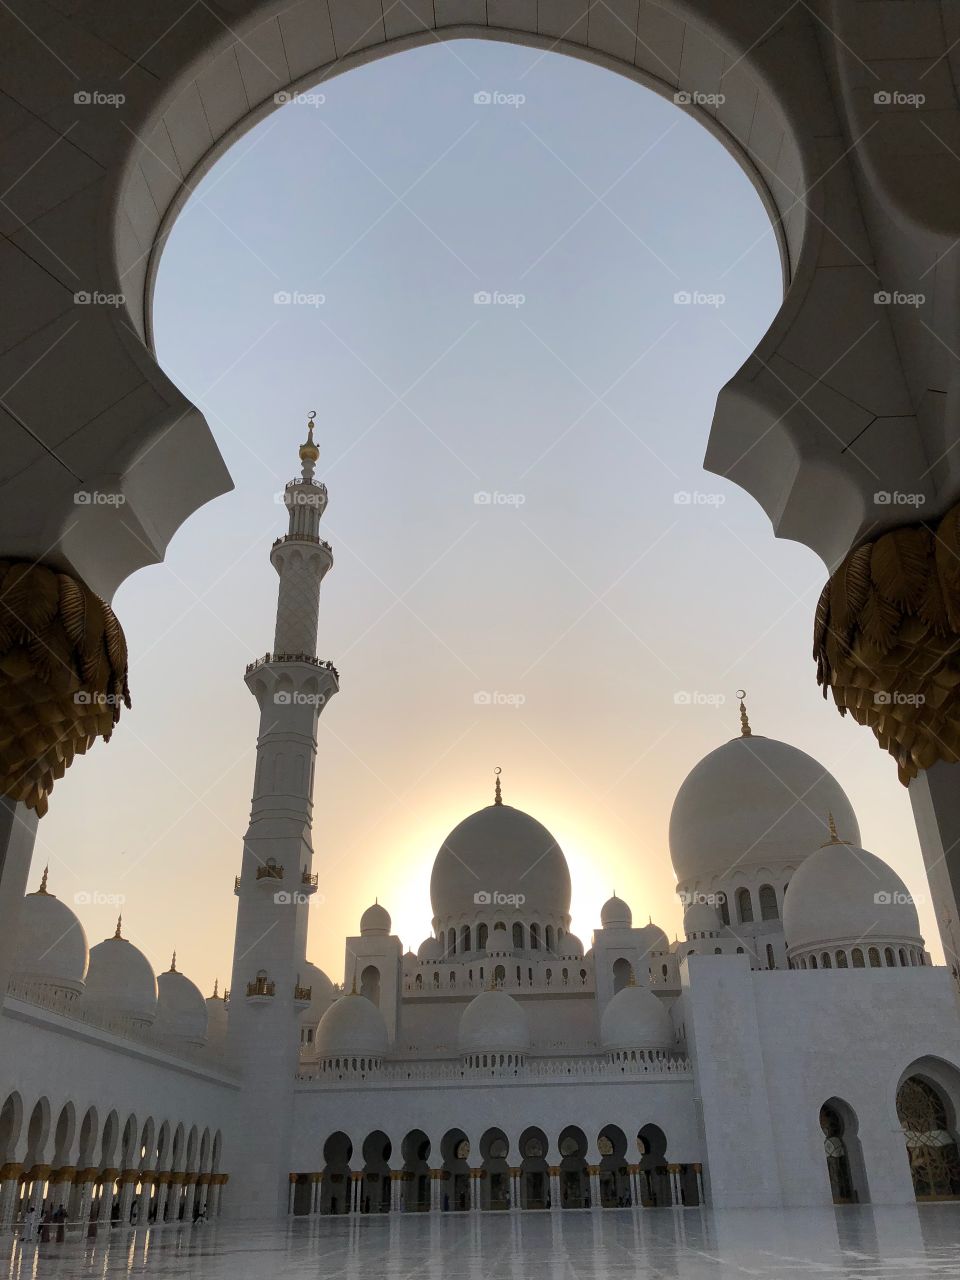 Light from heaven above the Grand Mosque in Dubai